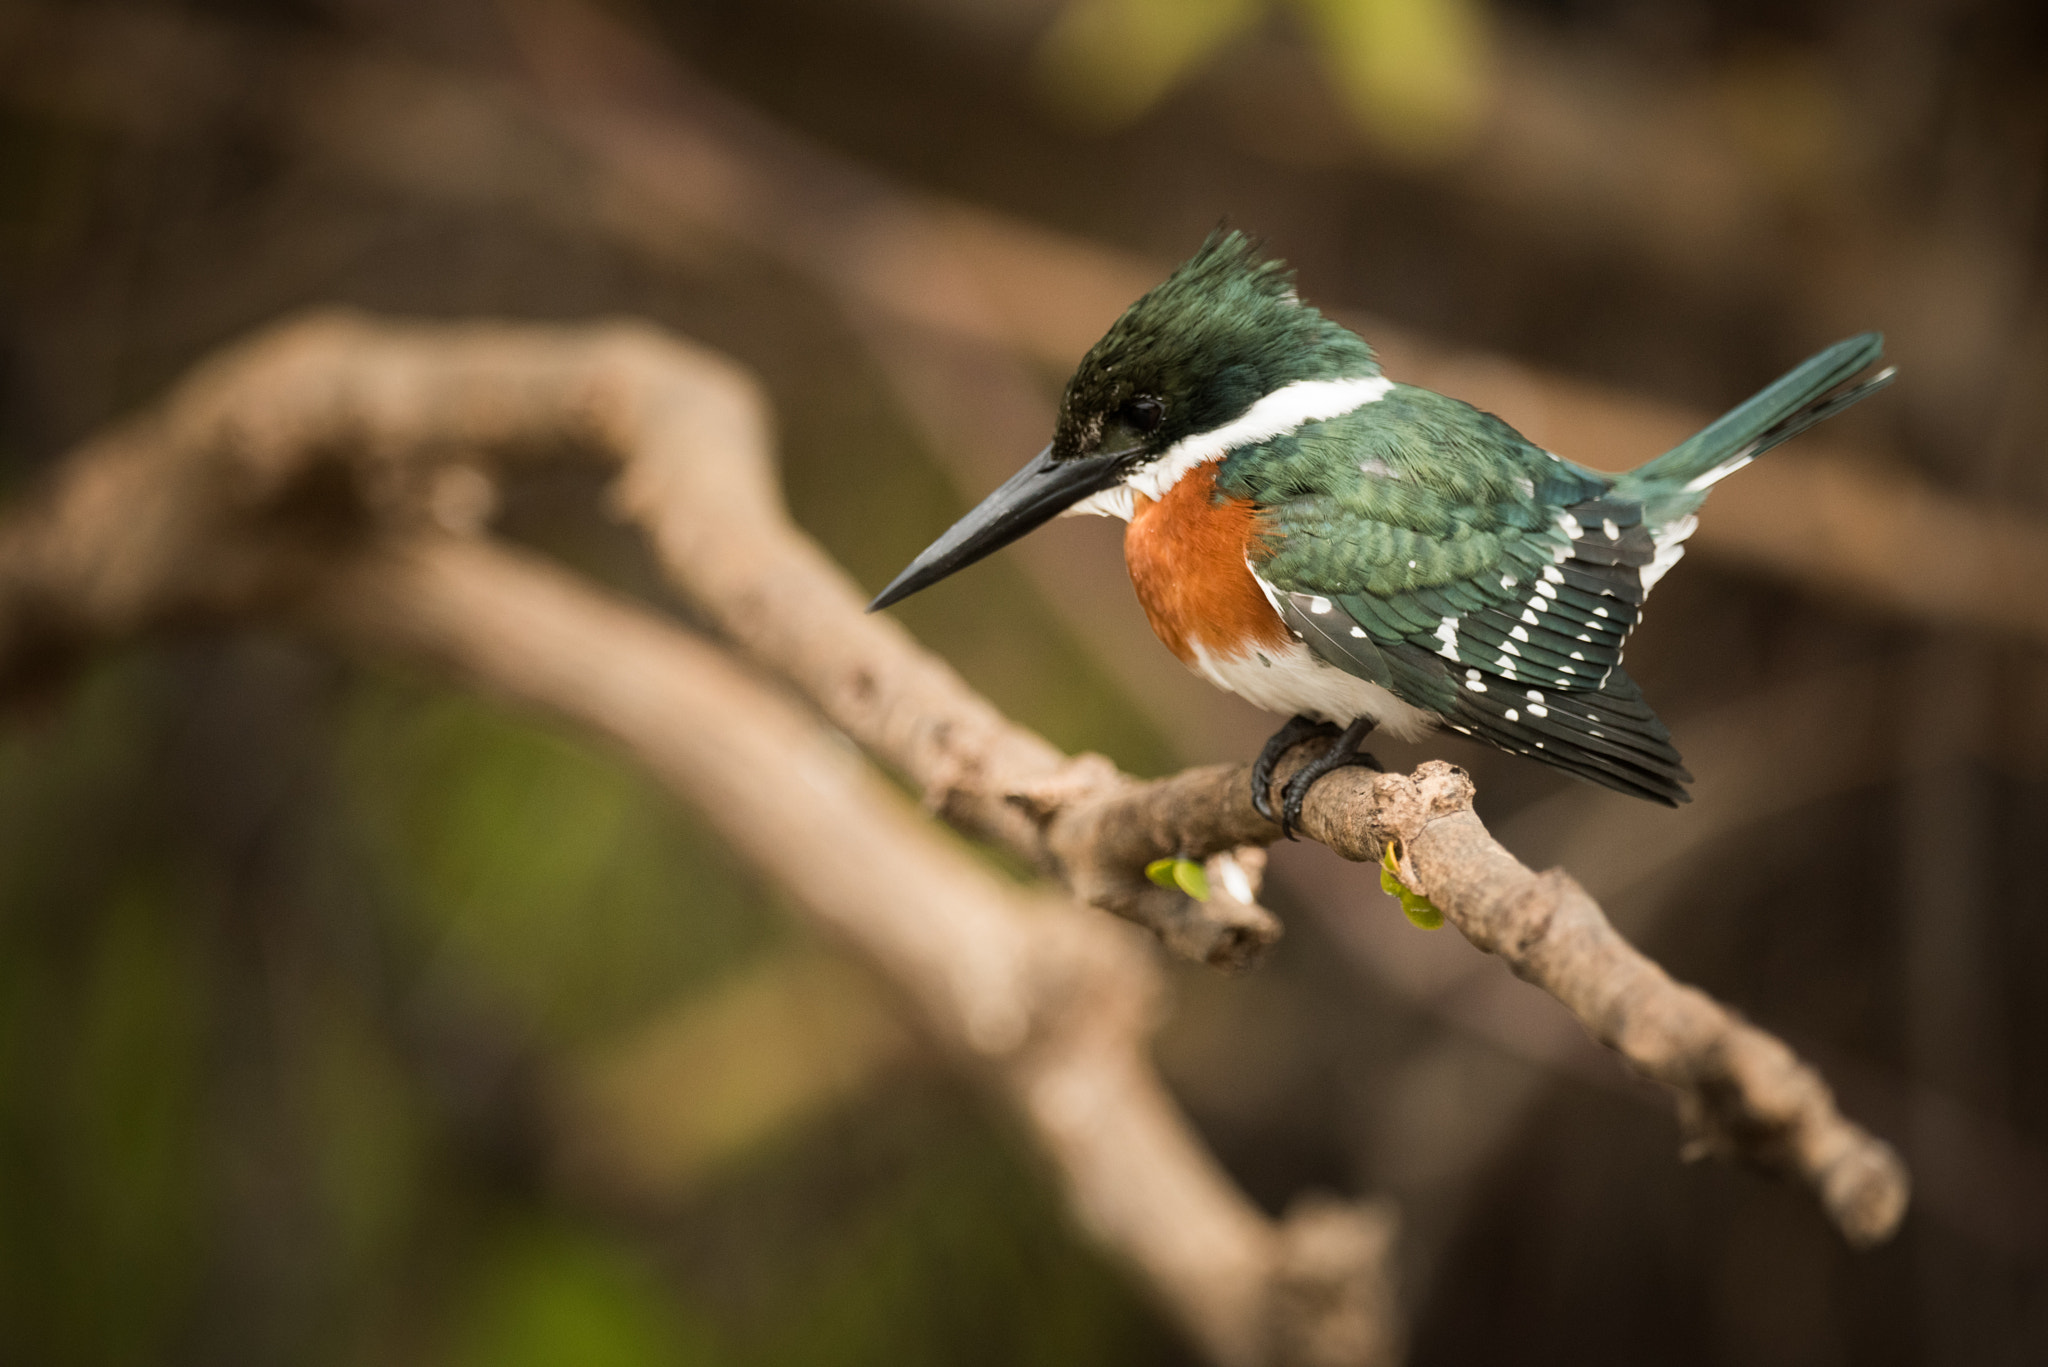 Nikon D810 sample photo. Green kingfisher perched on branch looking down photography